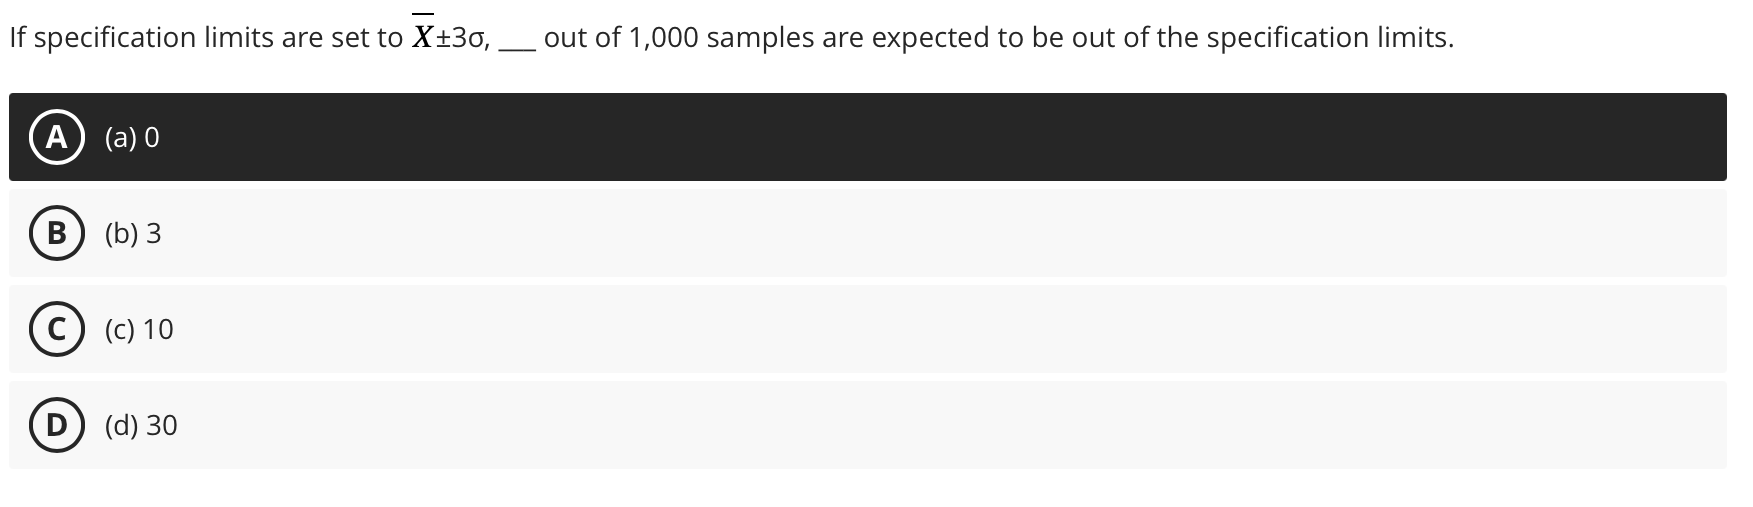 If specification limits are set to X30, out of 1,000 samples are expected to be out of the specification